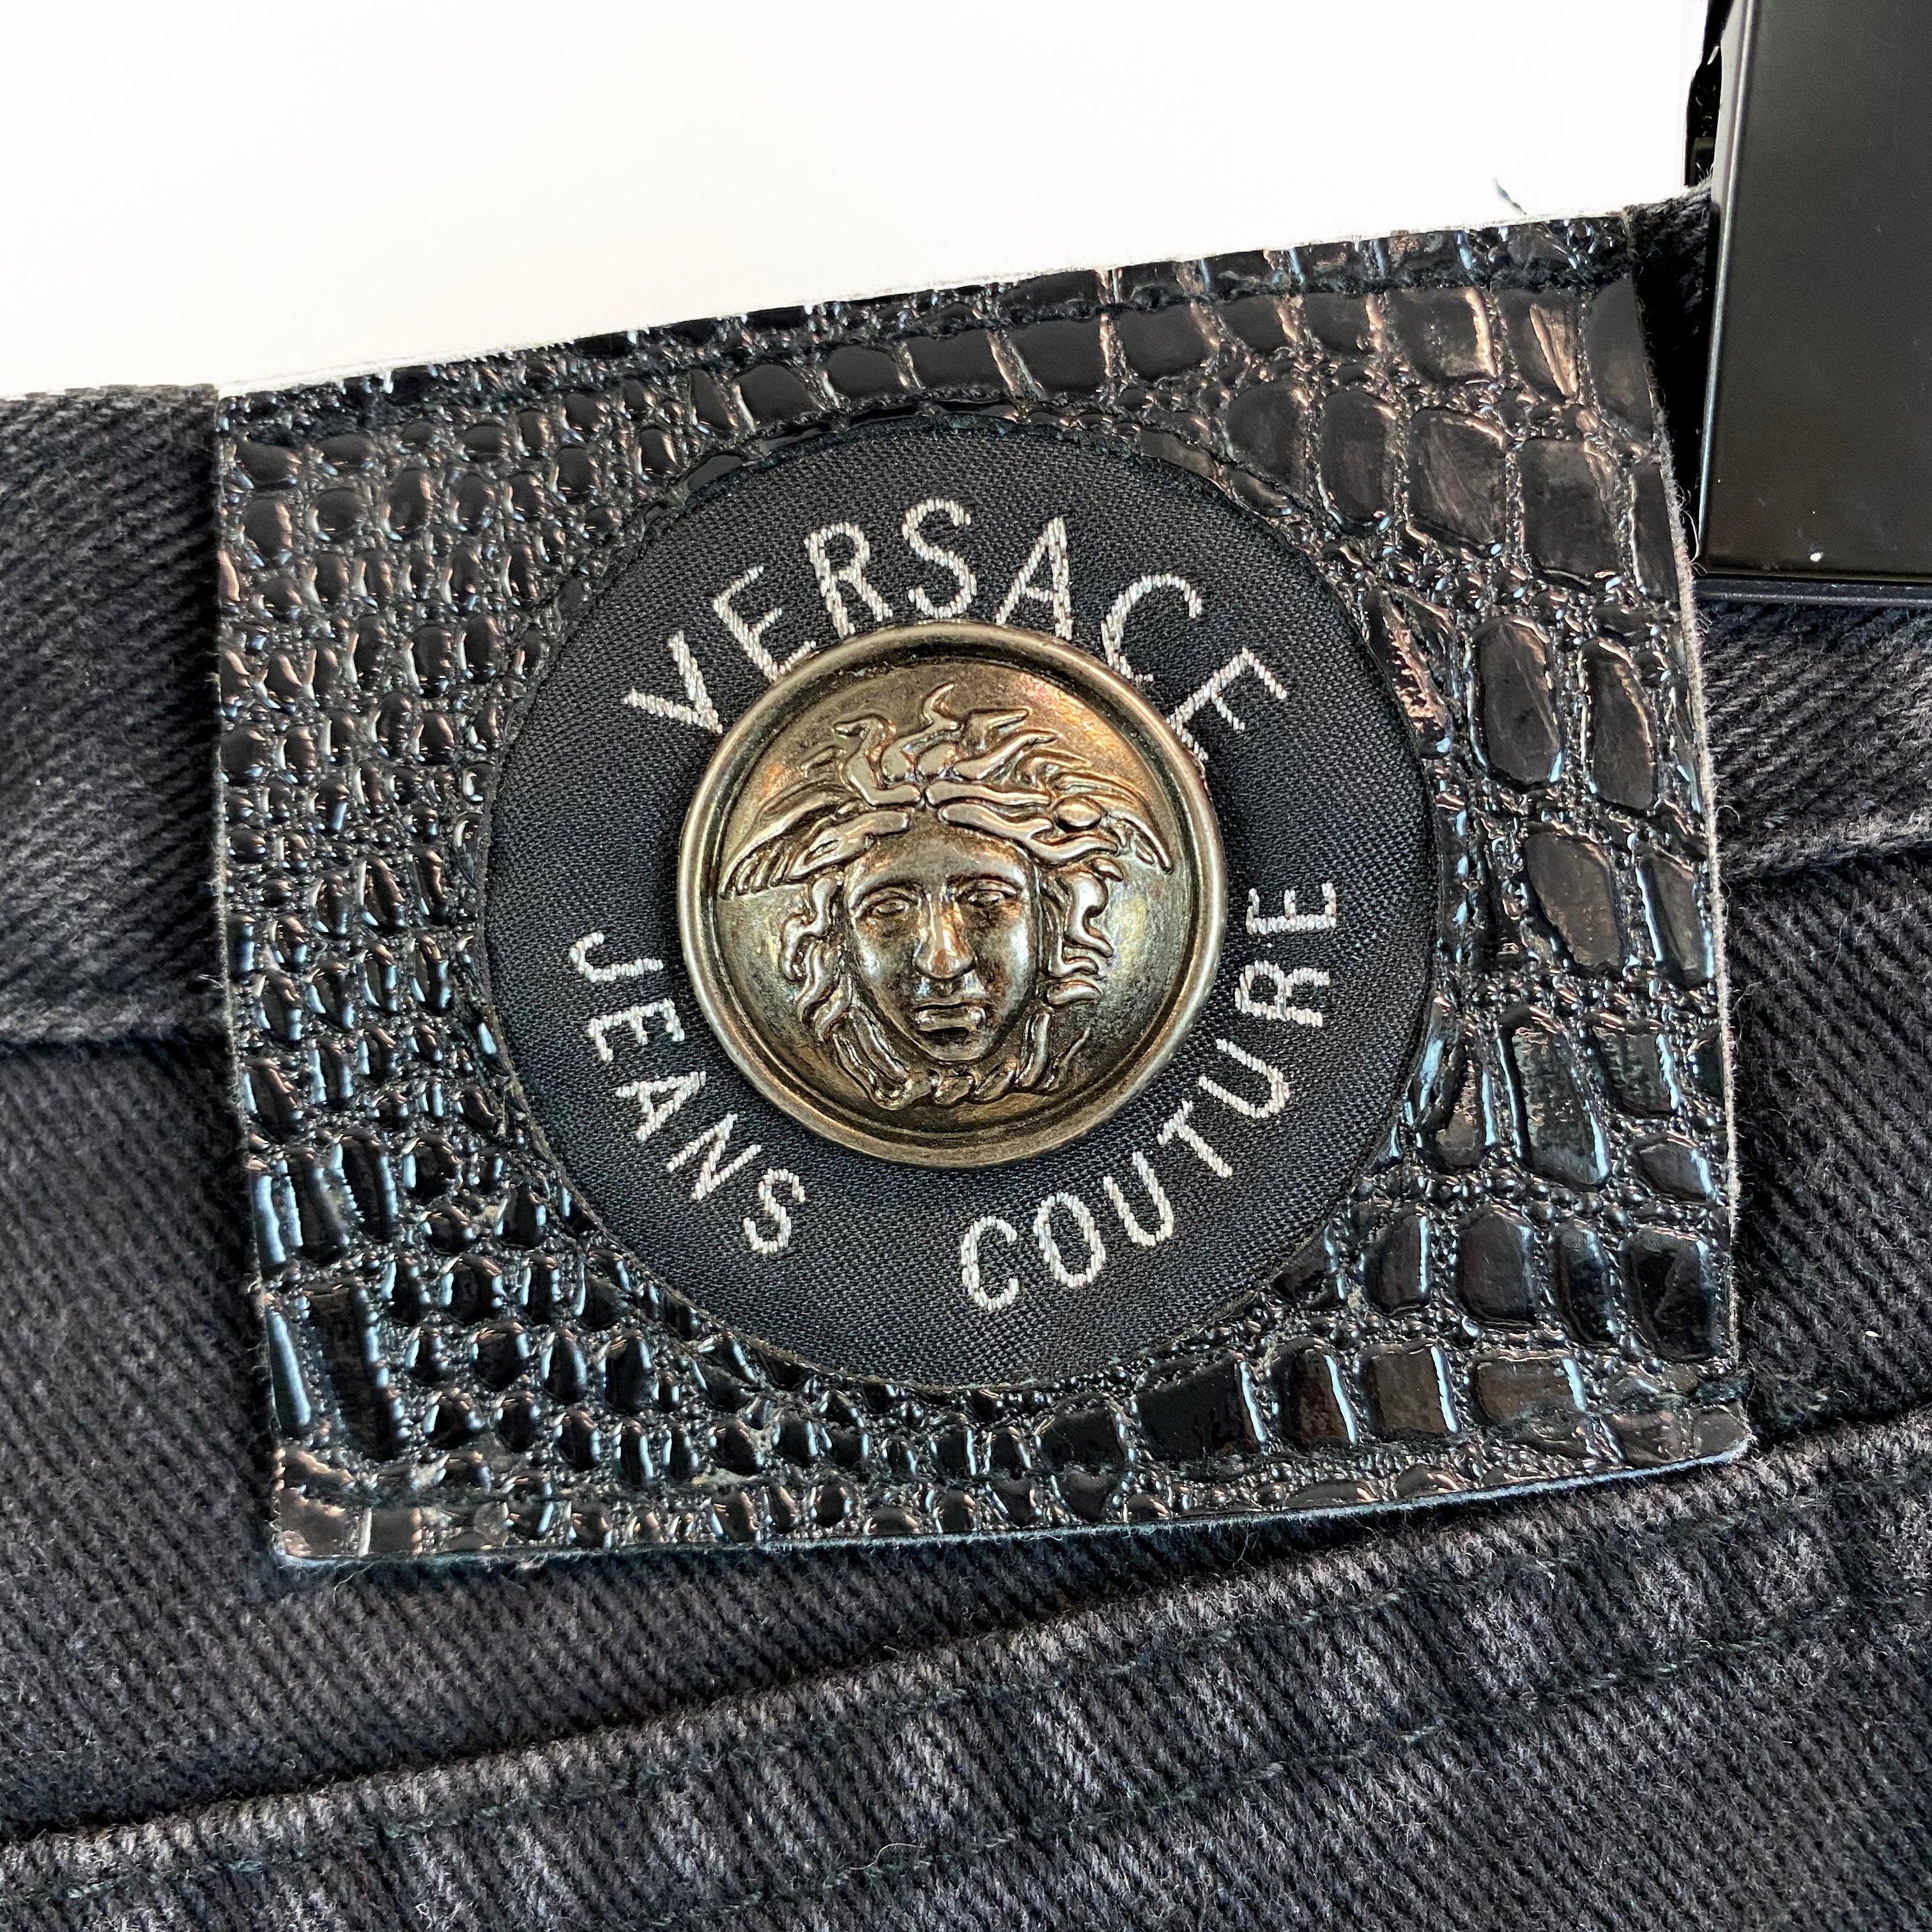 Versace Jeans Black High-Waisted Jeans